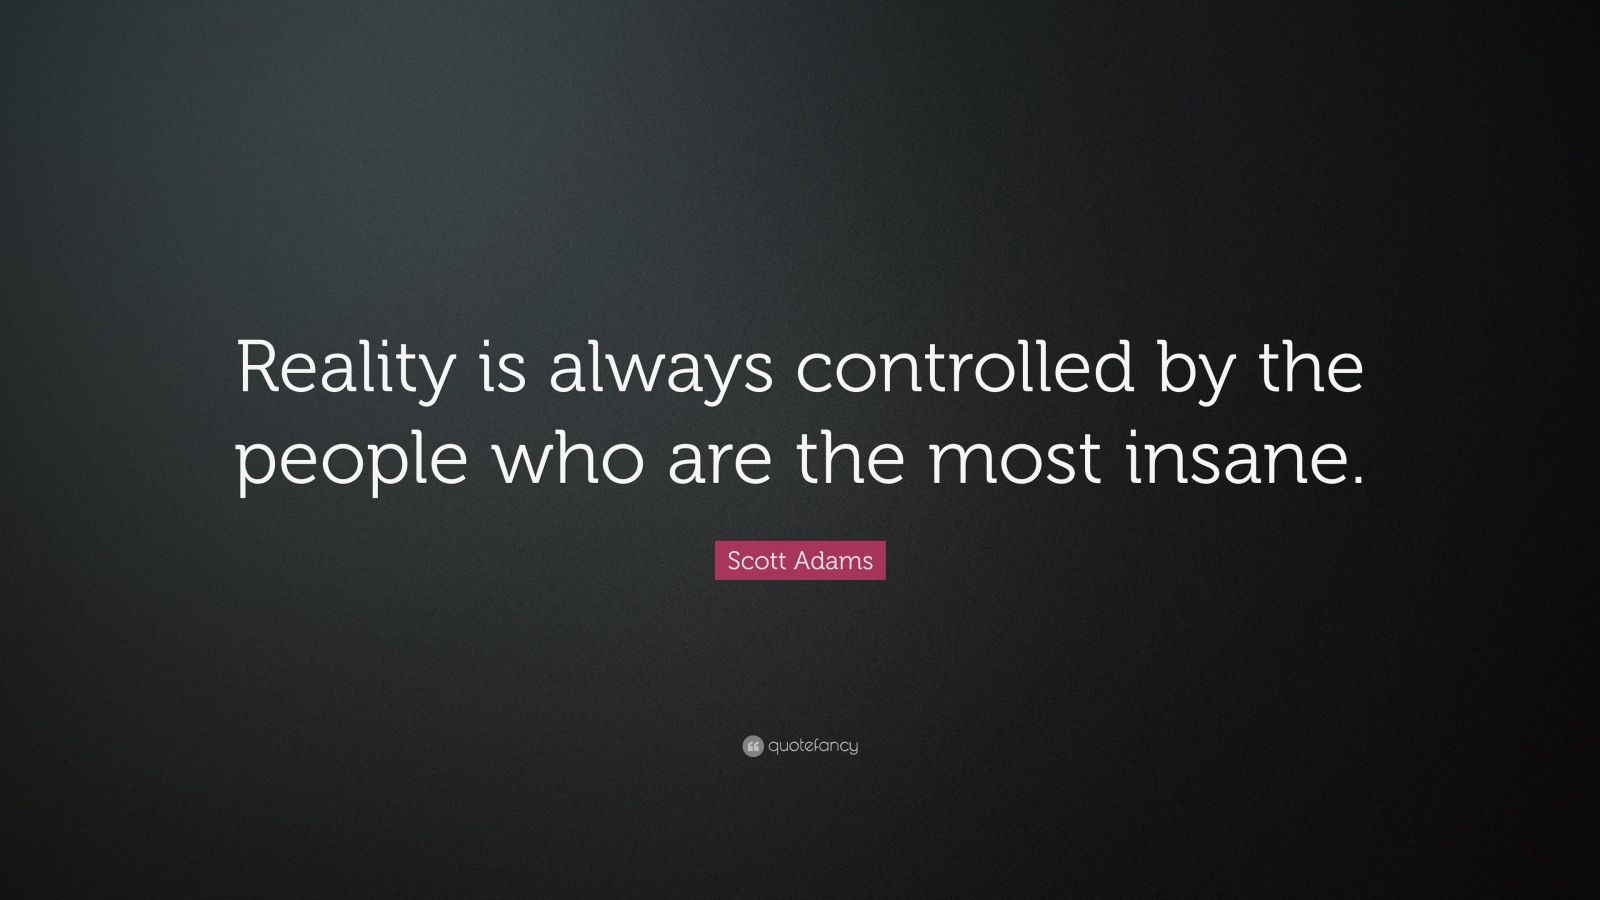 Scott Adams Quote: “Reality is always controlled by the people who are ...